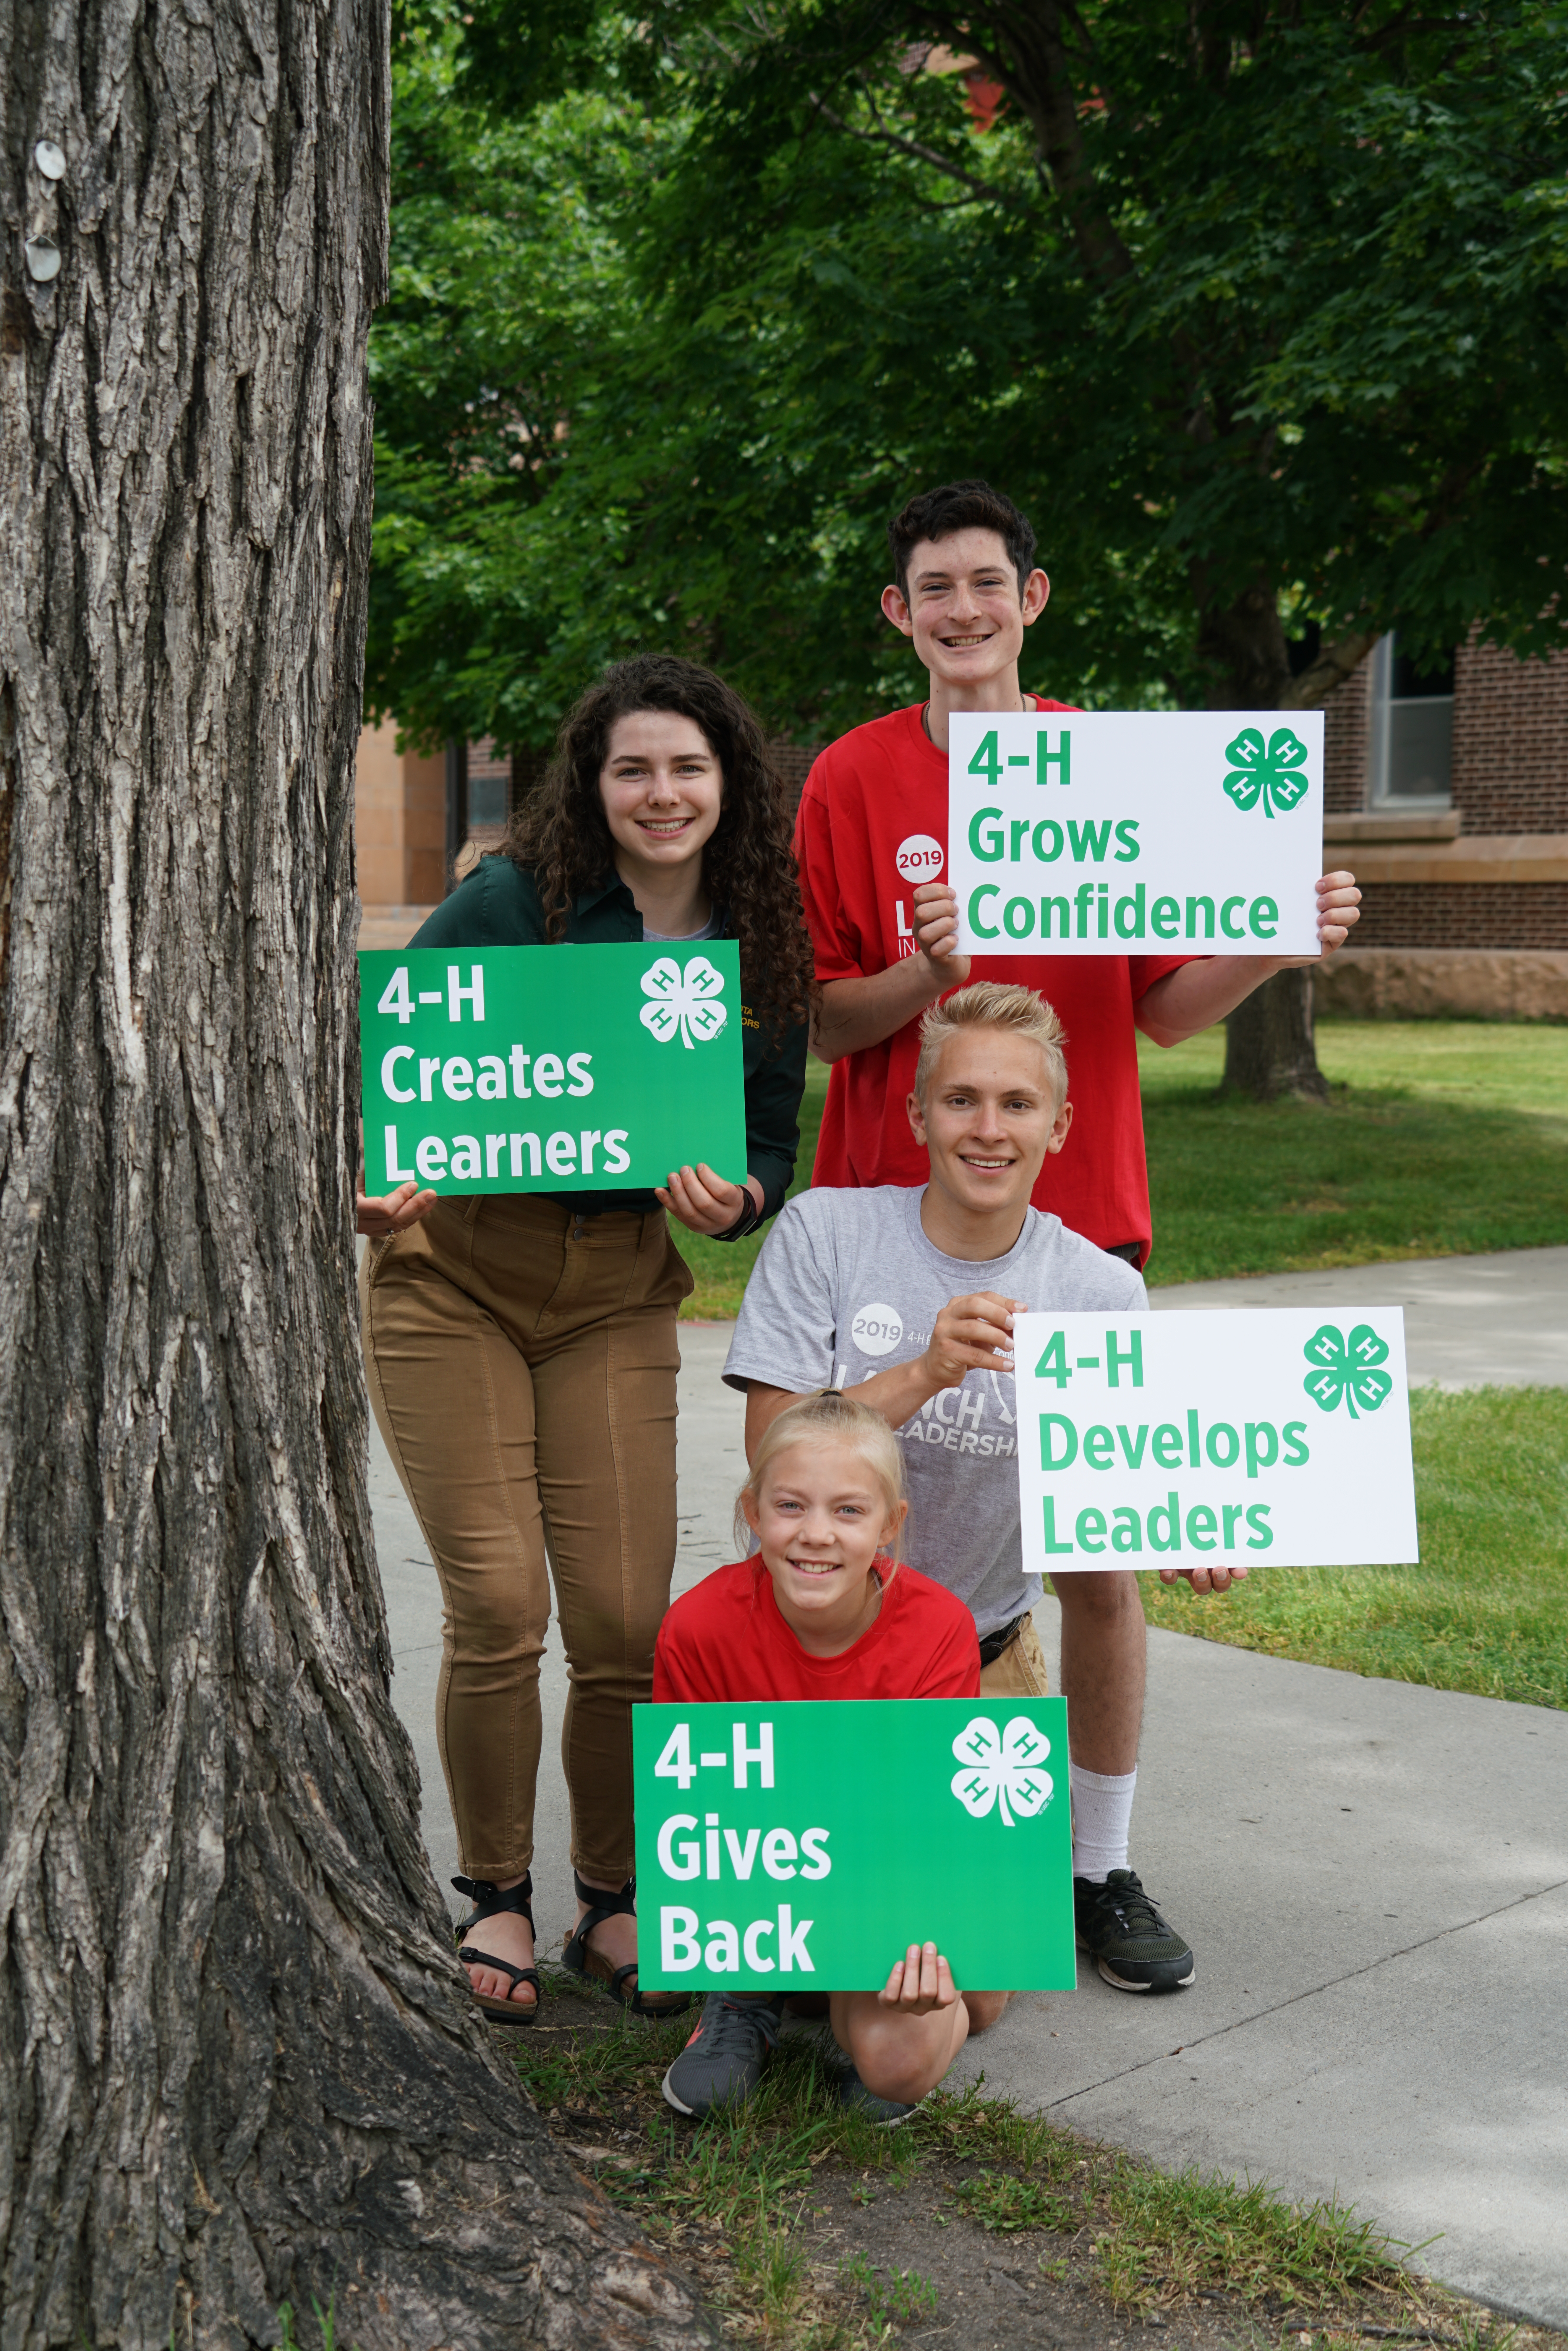 Funds donated will be used to expand 4-H programs and generate more scholarship opportunities for youth. (NDSU photo)